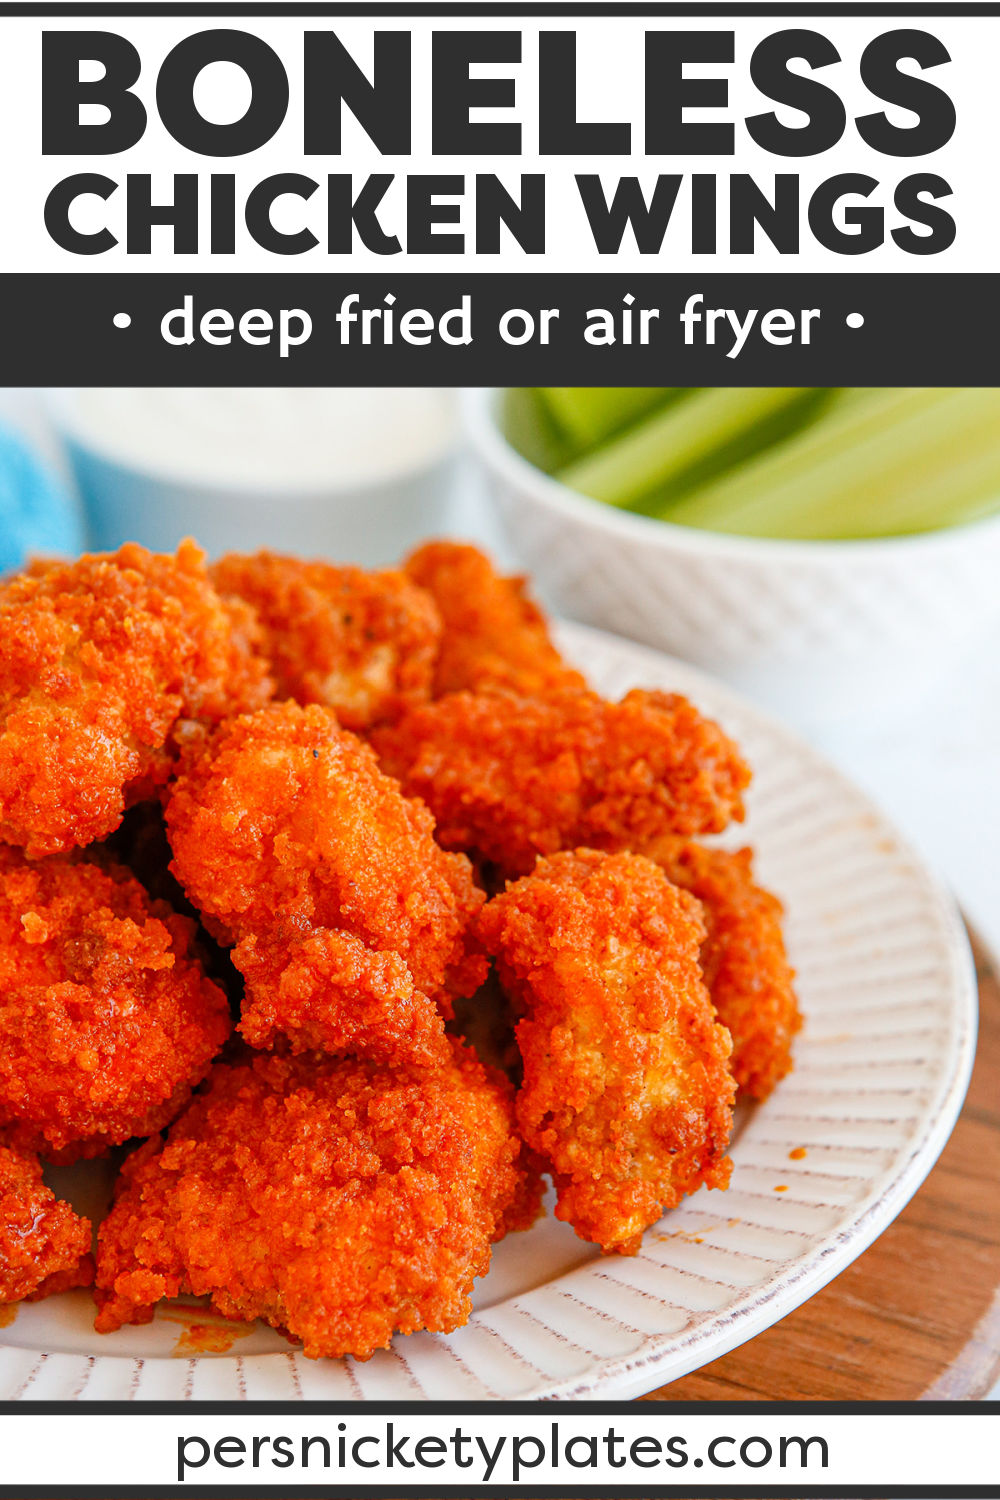 These easy boneless chicken wings are lightly breaded with panko bread crumbs and then fried until golden brown. Toss them in your favorite sauce and enjoy! | www.persnicketyplates.com